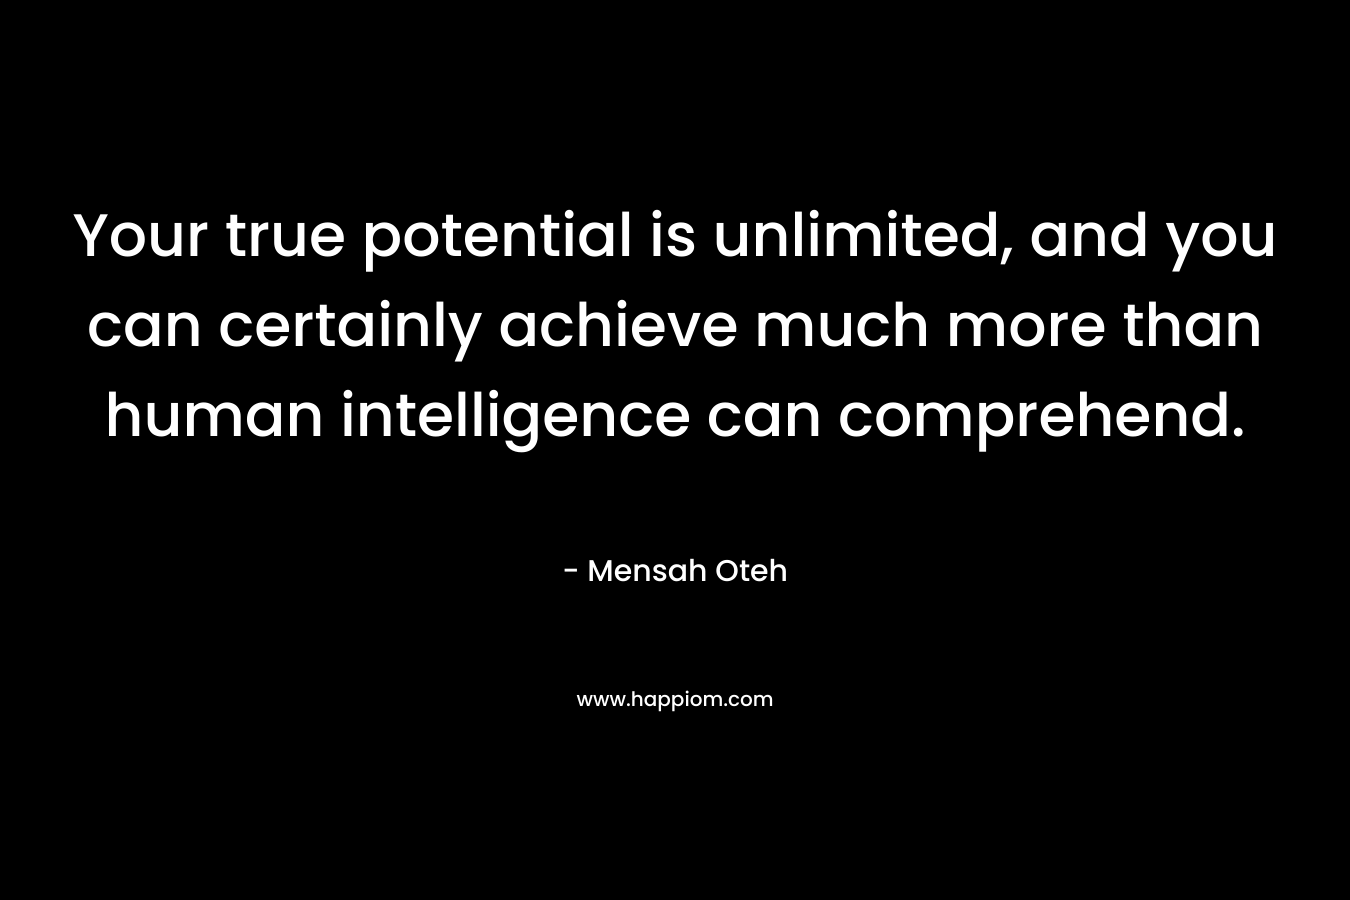 Your true potential is unlimited, and you can certainly achieve much more than human intelligence can comprehend.